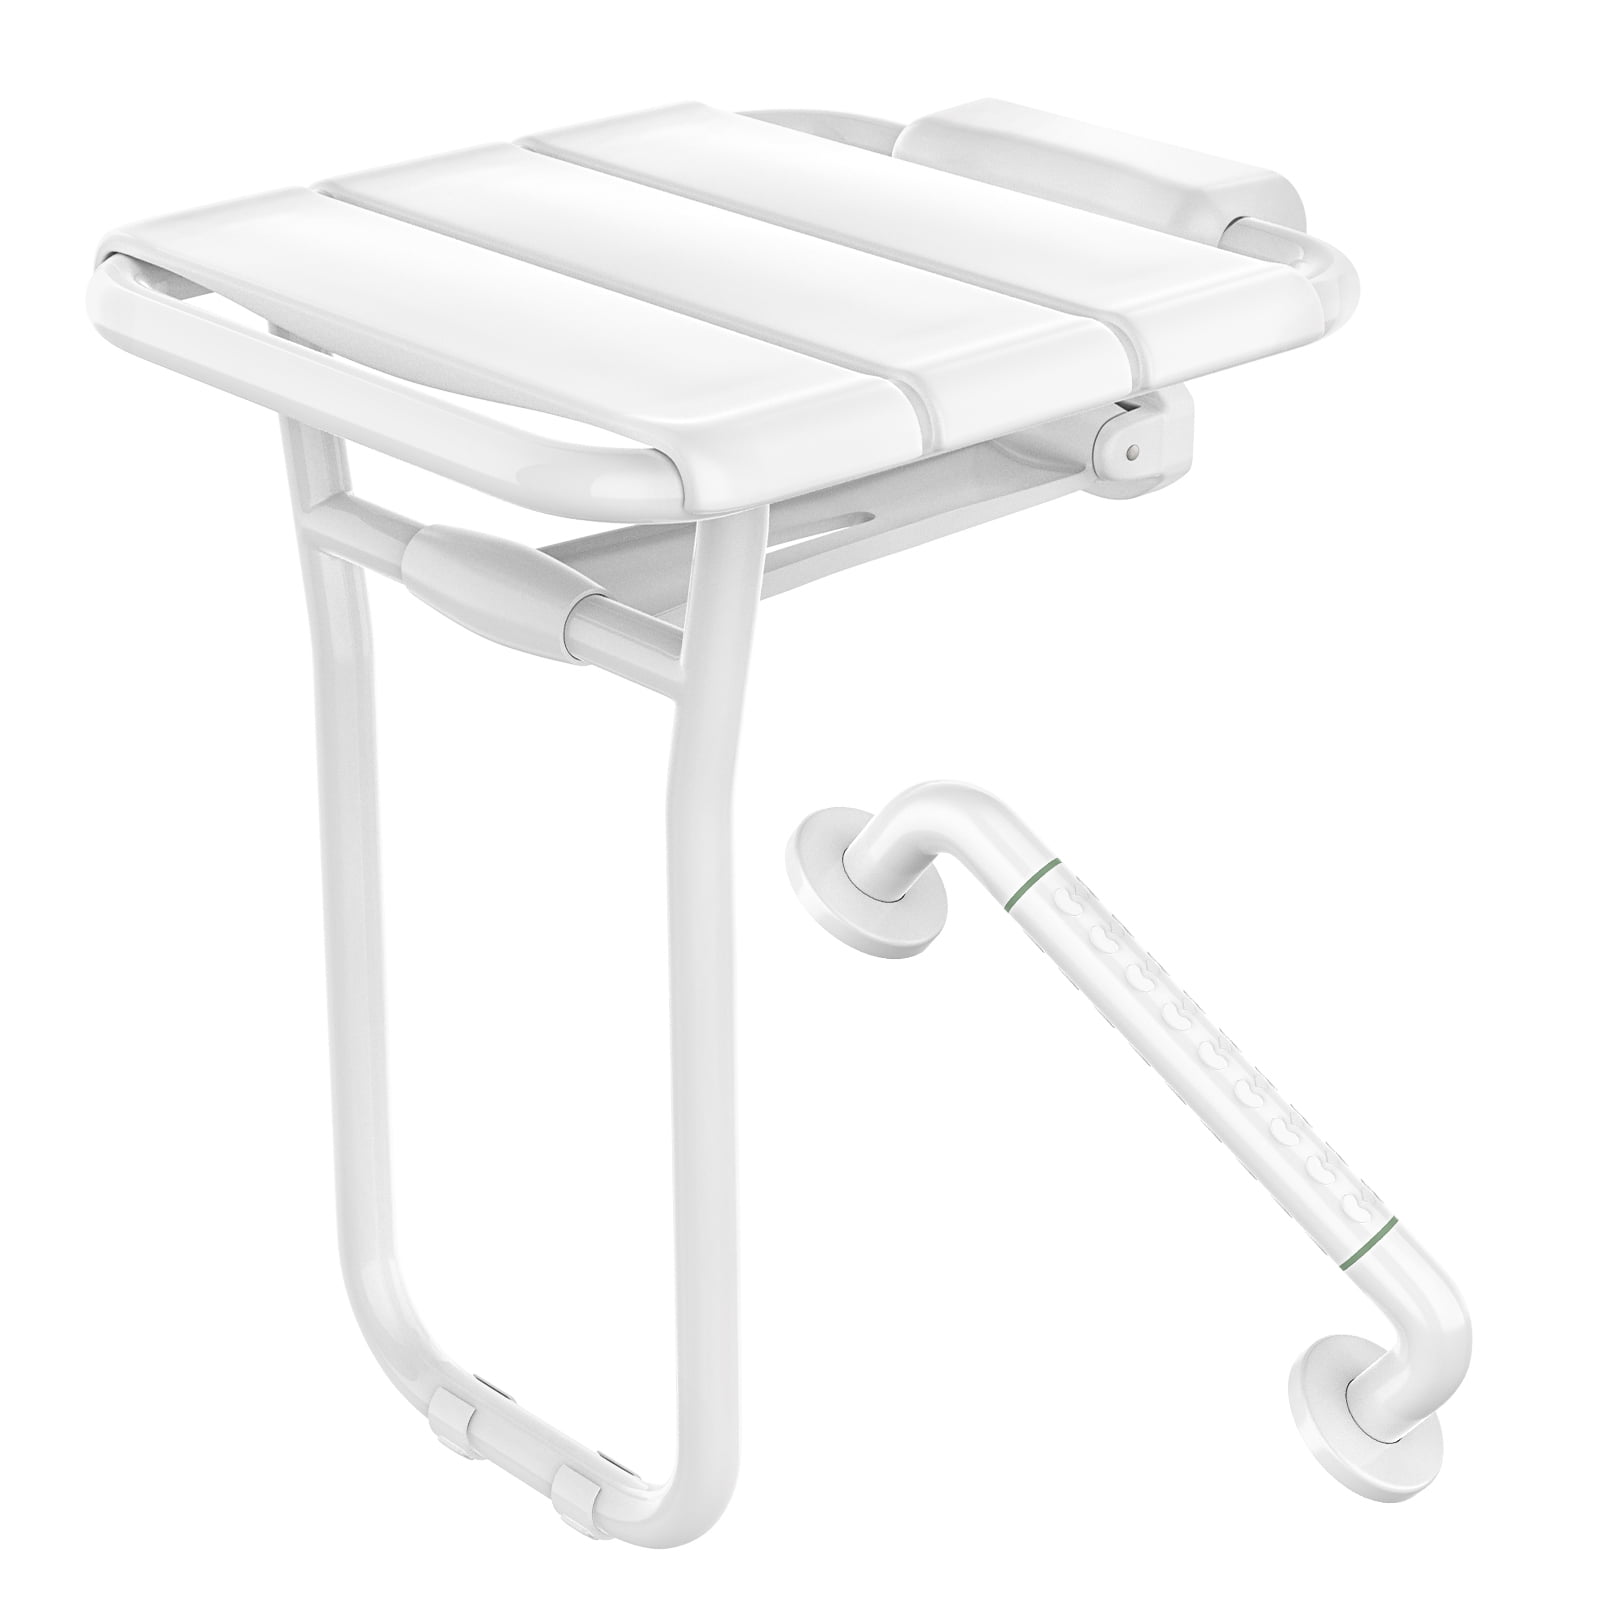 Folding Shower Seat Wall Mounted With Grab Bar Stainless Steel Shower